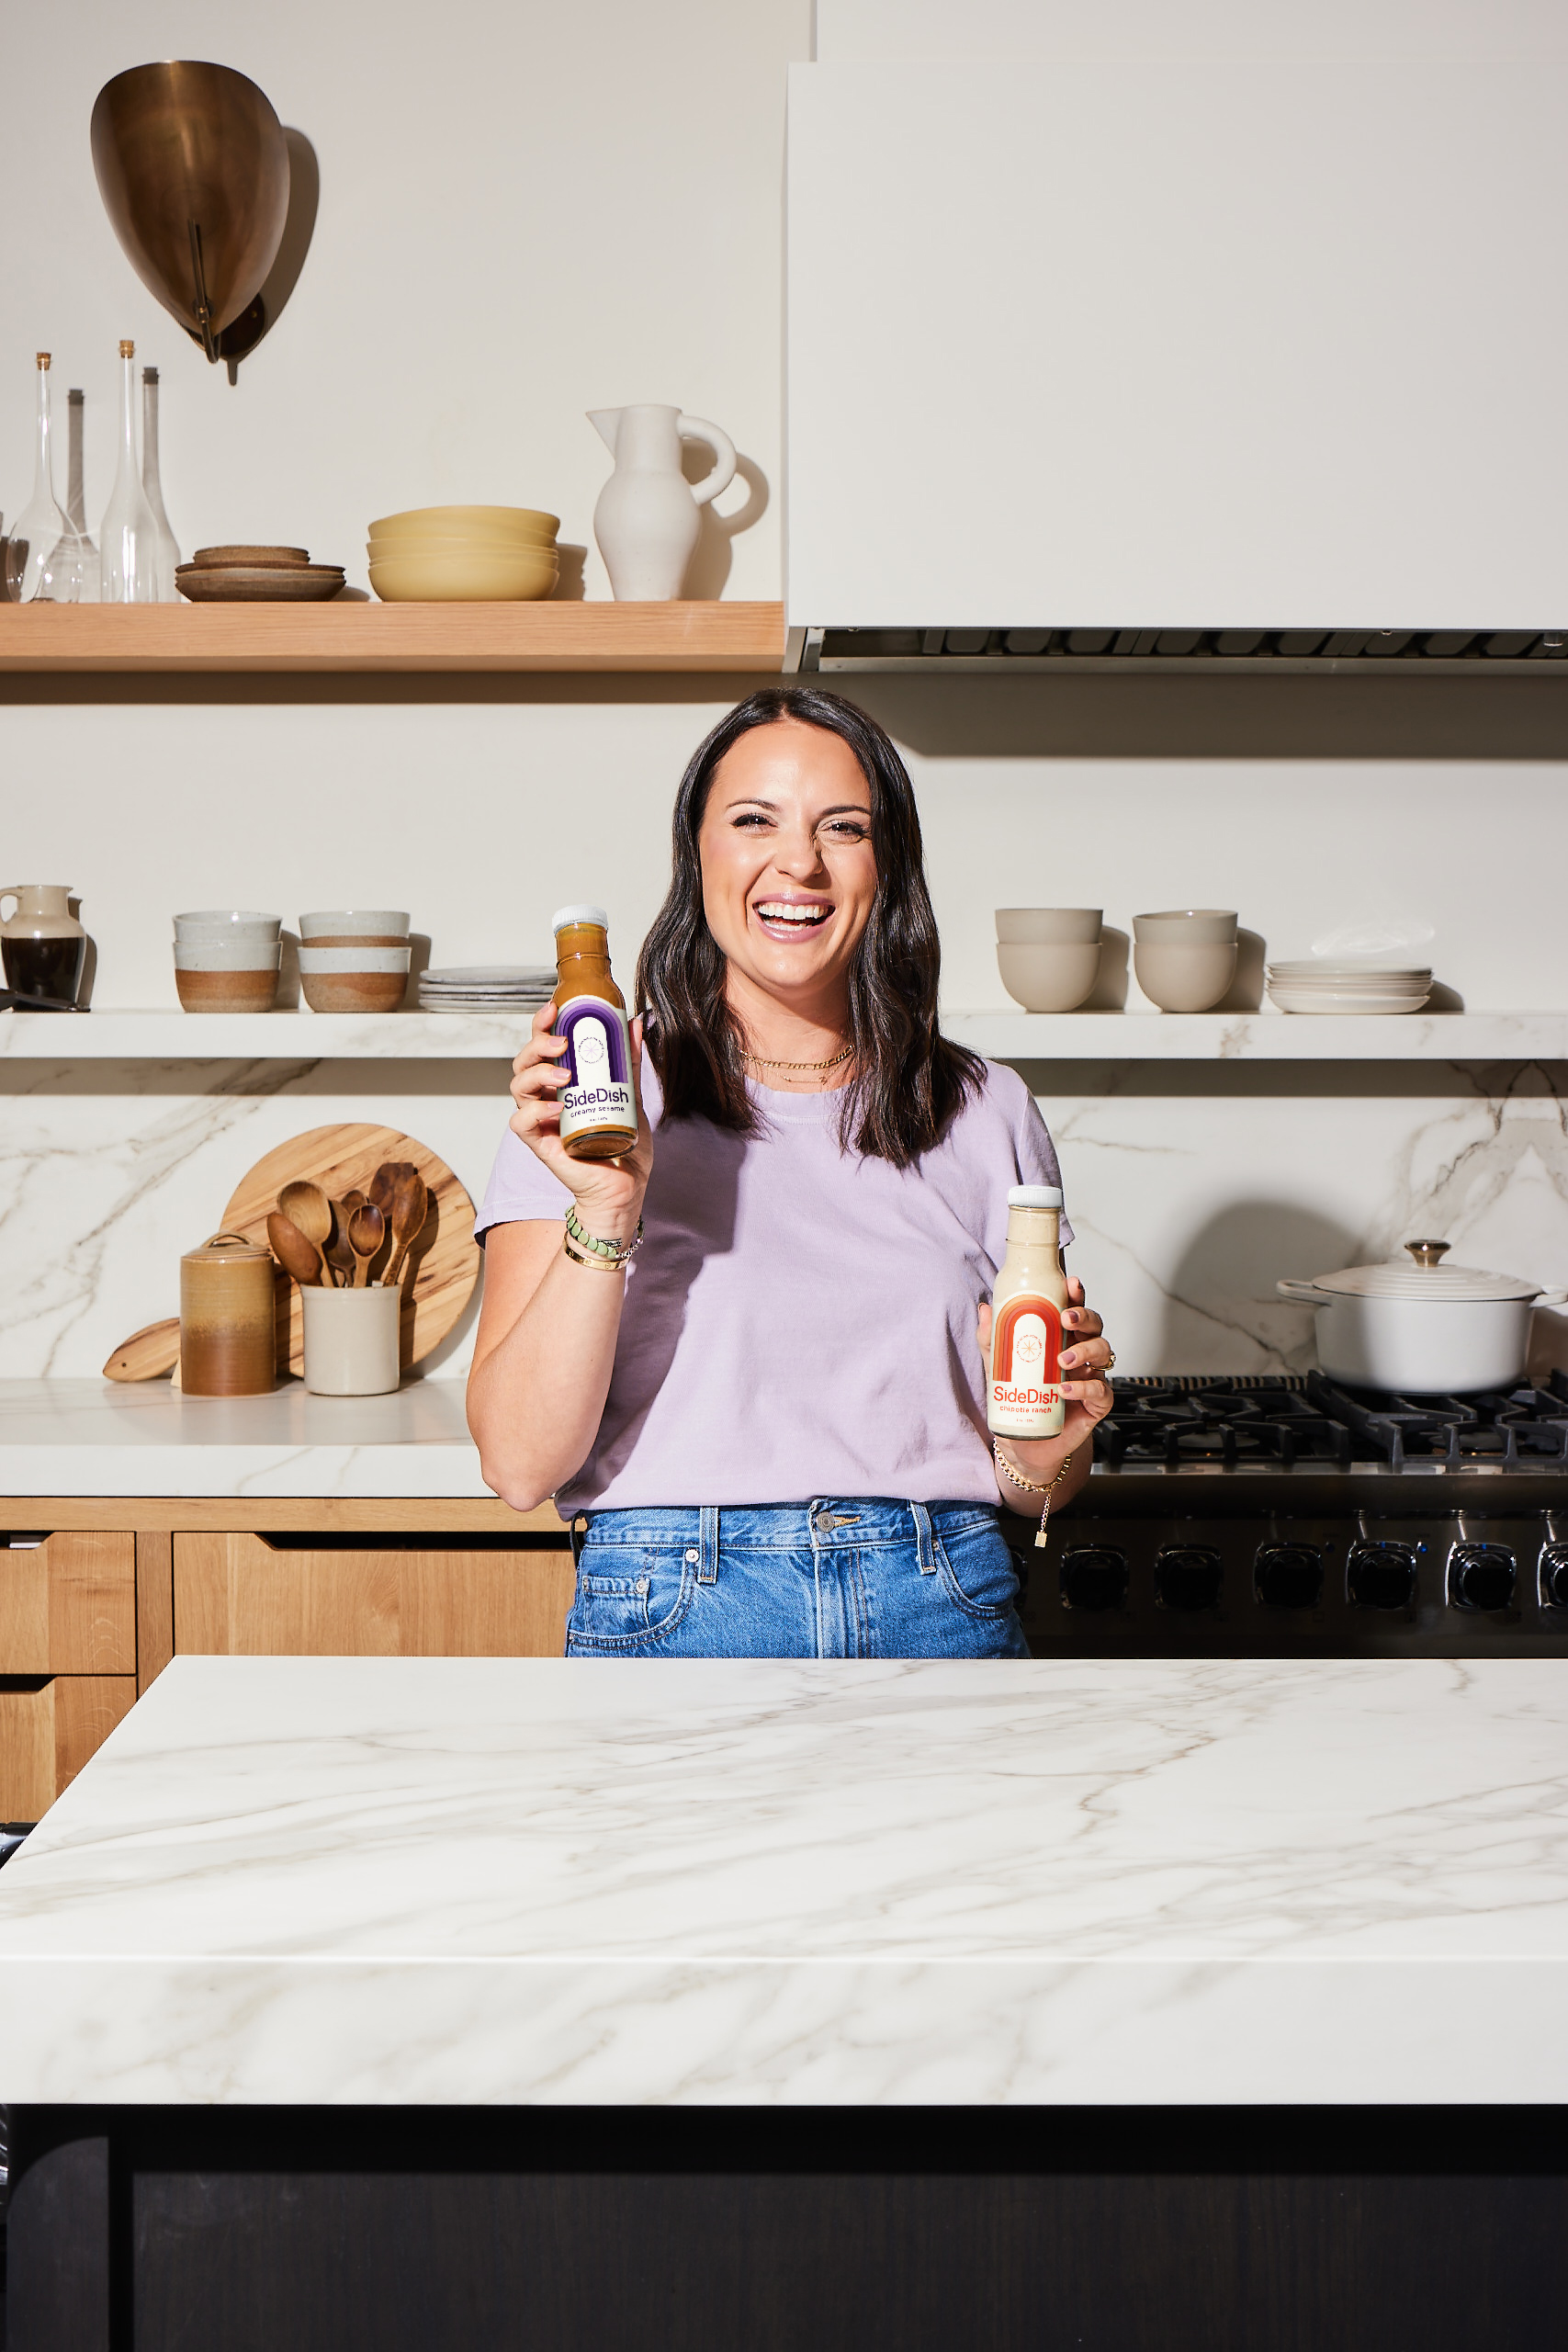 A woman stands in a kitchen, laughing and holding up two bottles of salad dressing.